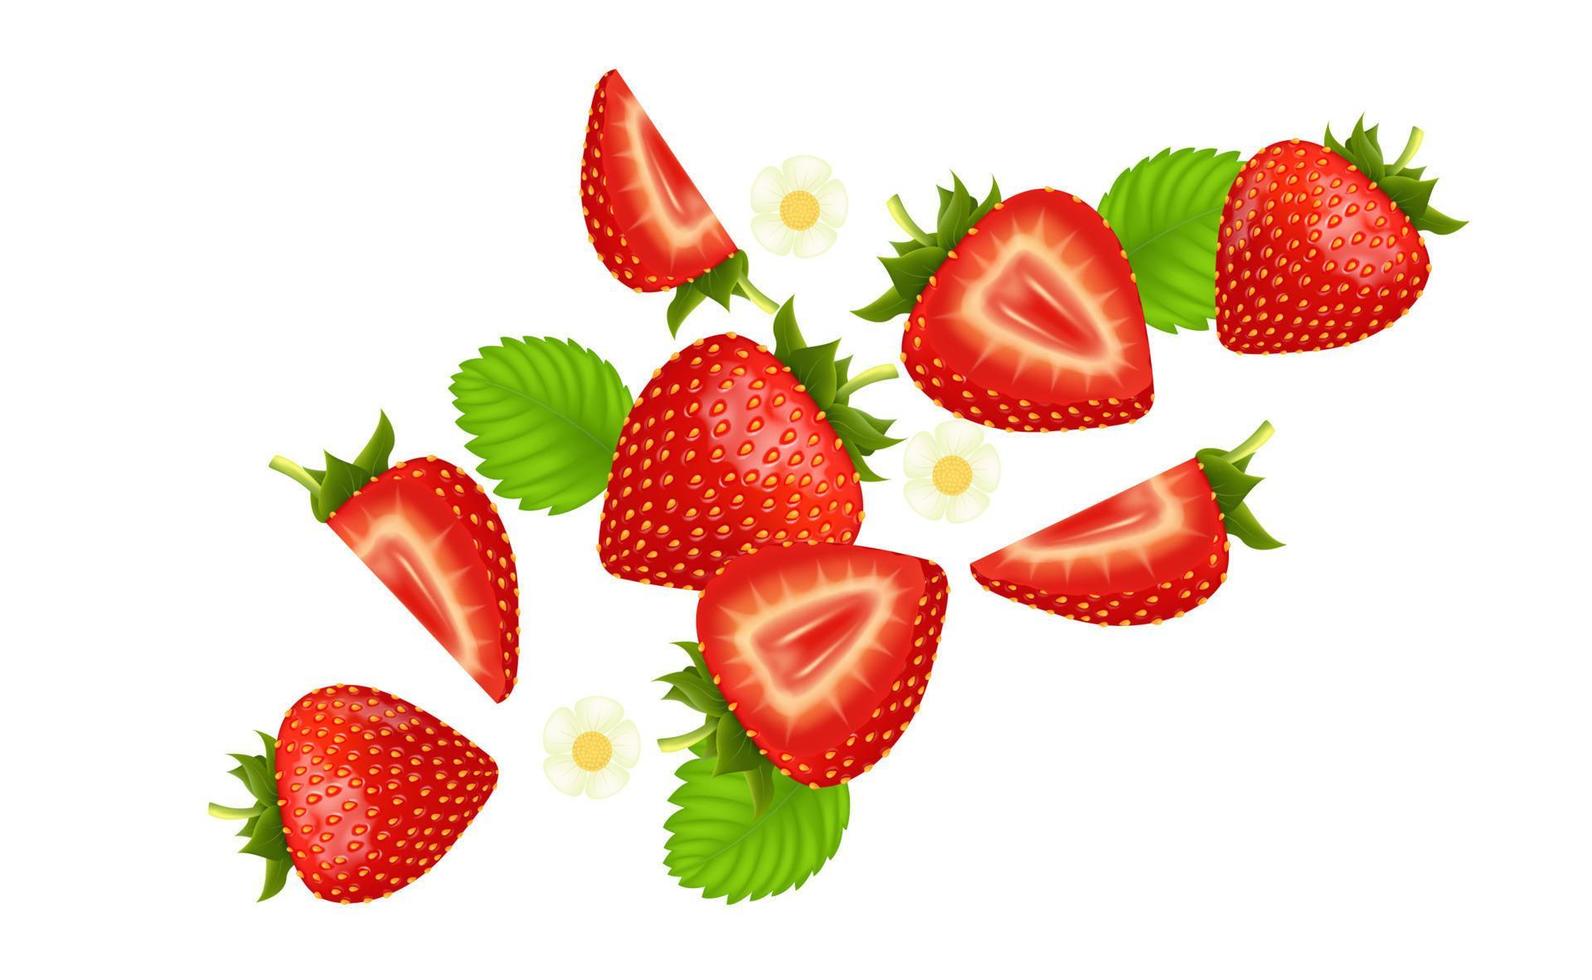 Fresh strawberry fruits flying and leaves with strawberries of pieces element in the middle on white background. Realistic 3D vector illustration.